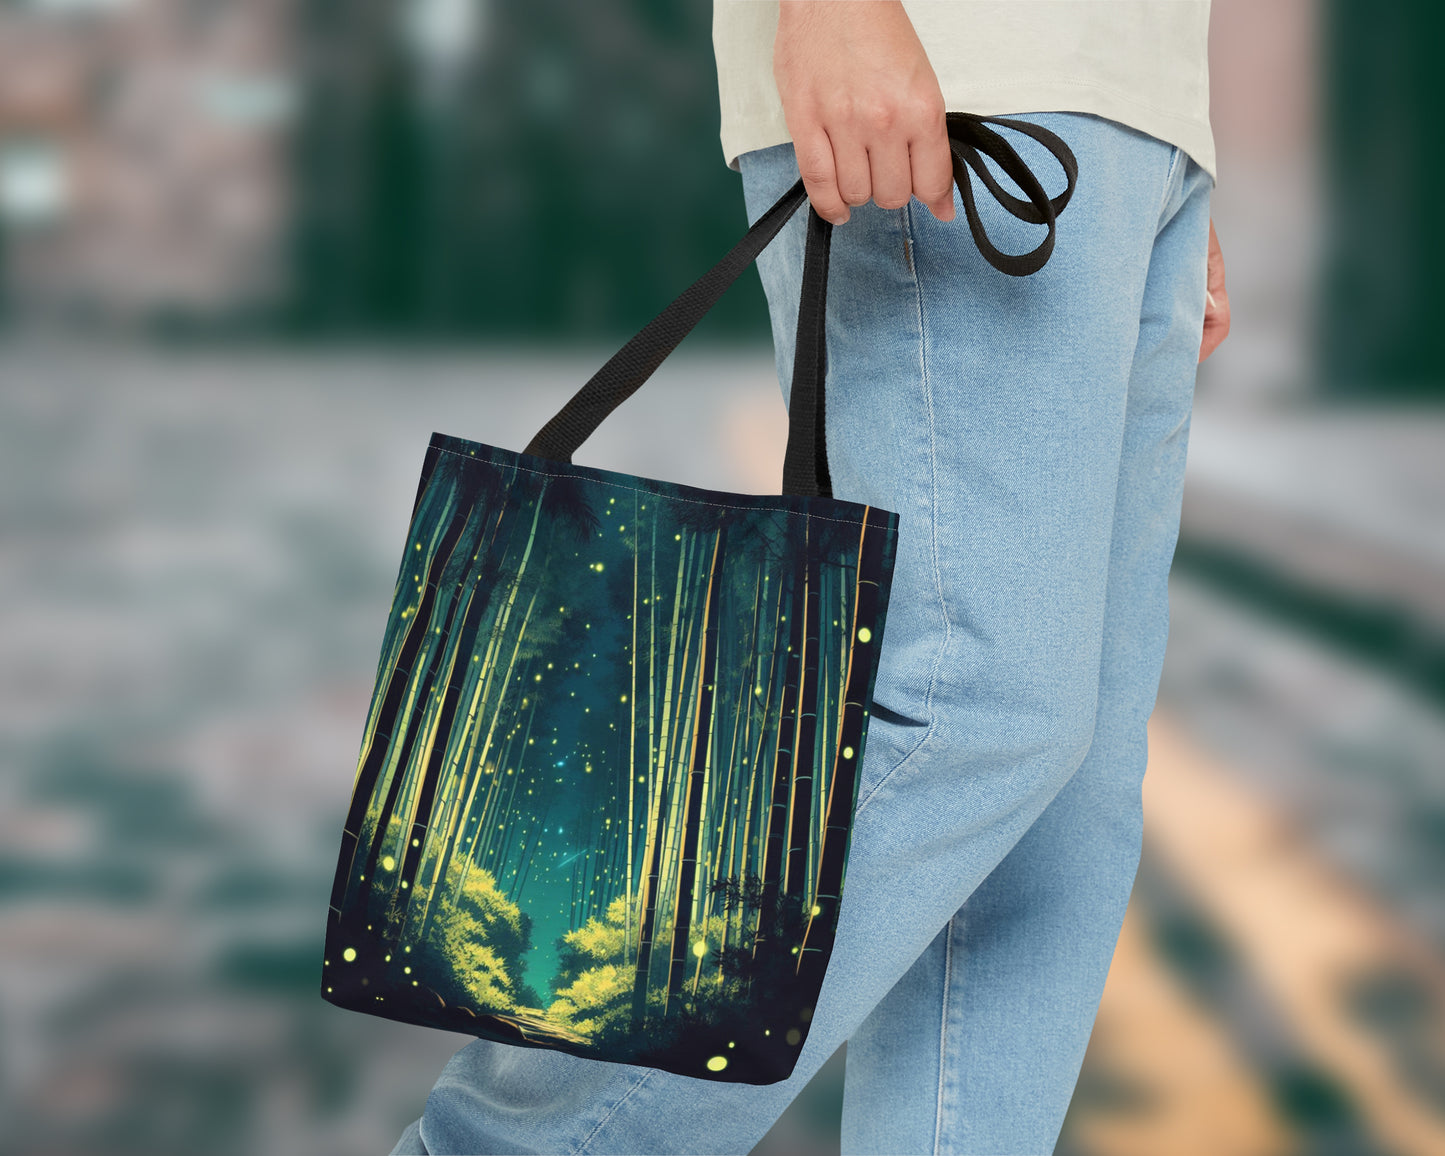 Bamboo forests in anime style tote bag